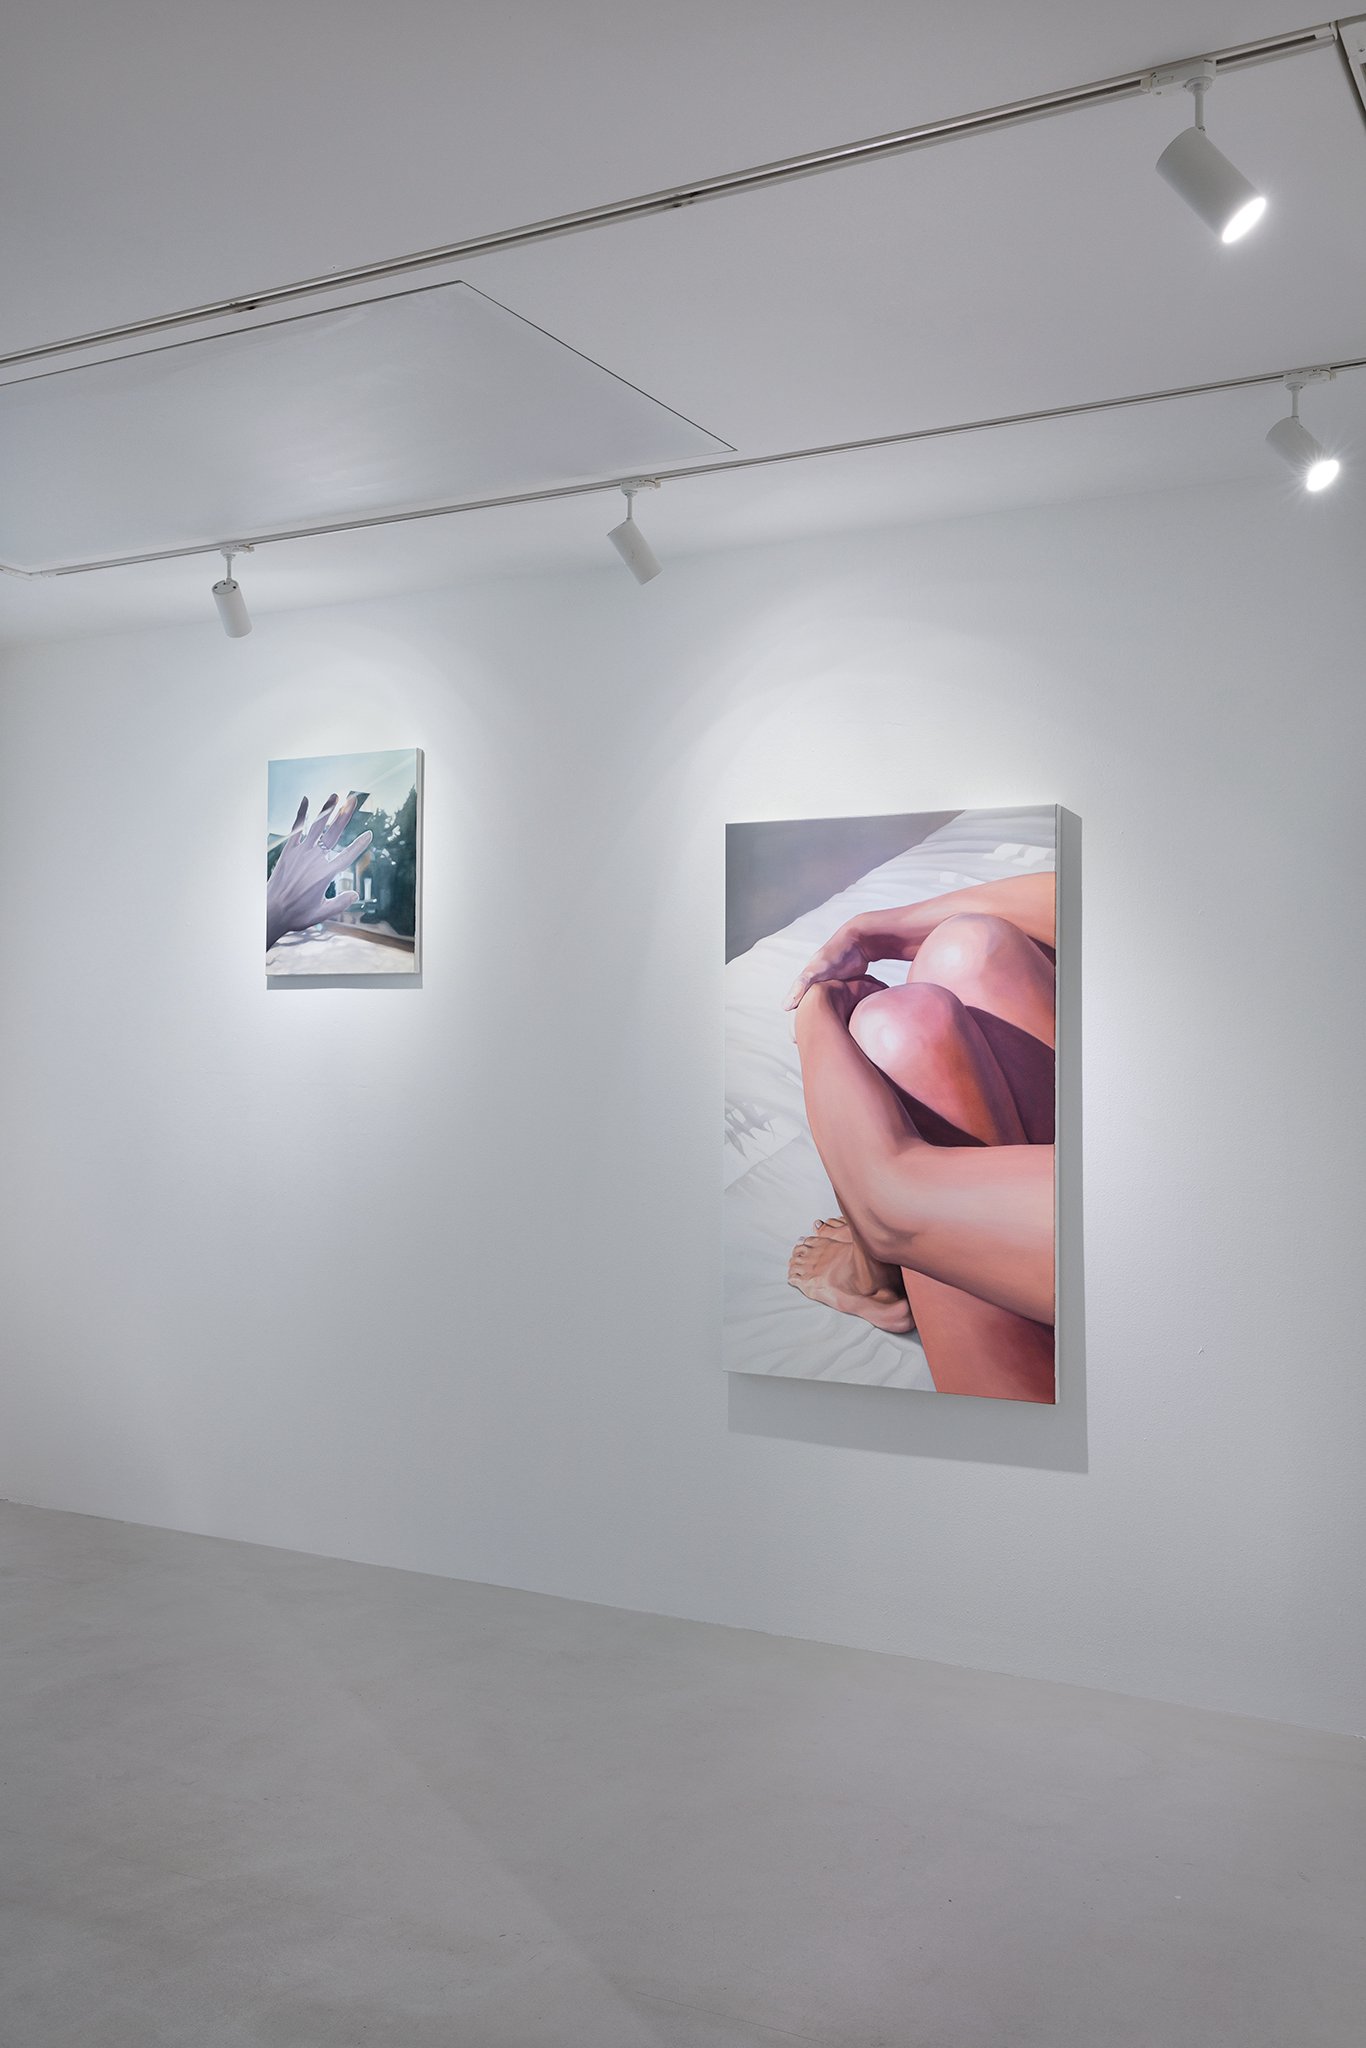 Installation image for Femininity, art as a self-reproduction, at Everyday Mooonday